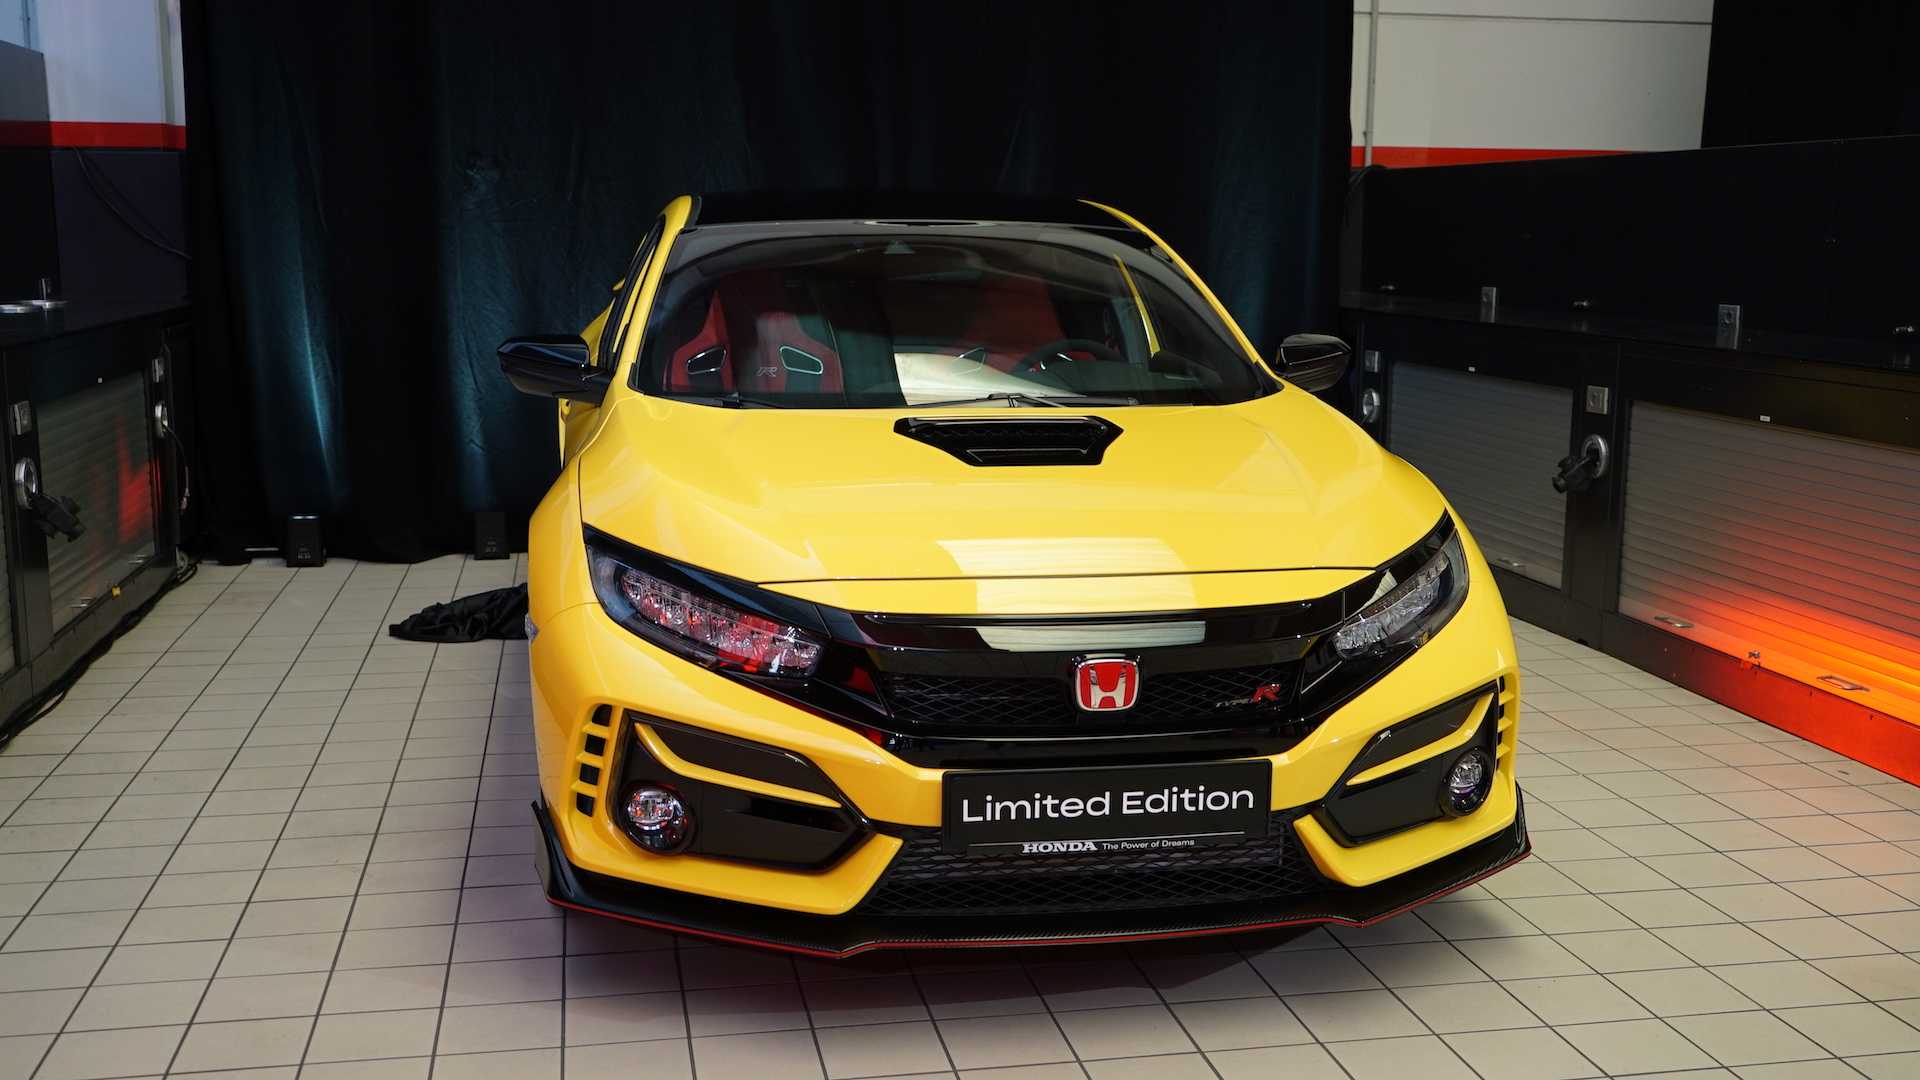 The 2021 Honda Civic Type R Limited Edition Is Ready For The Track